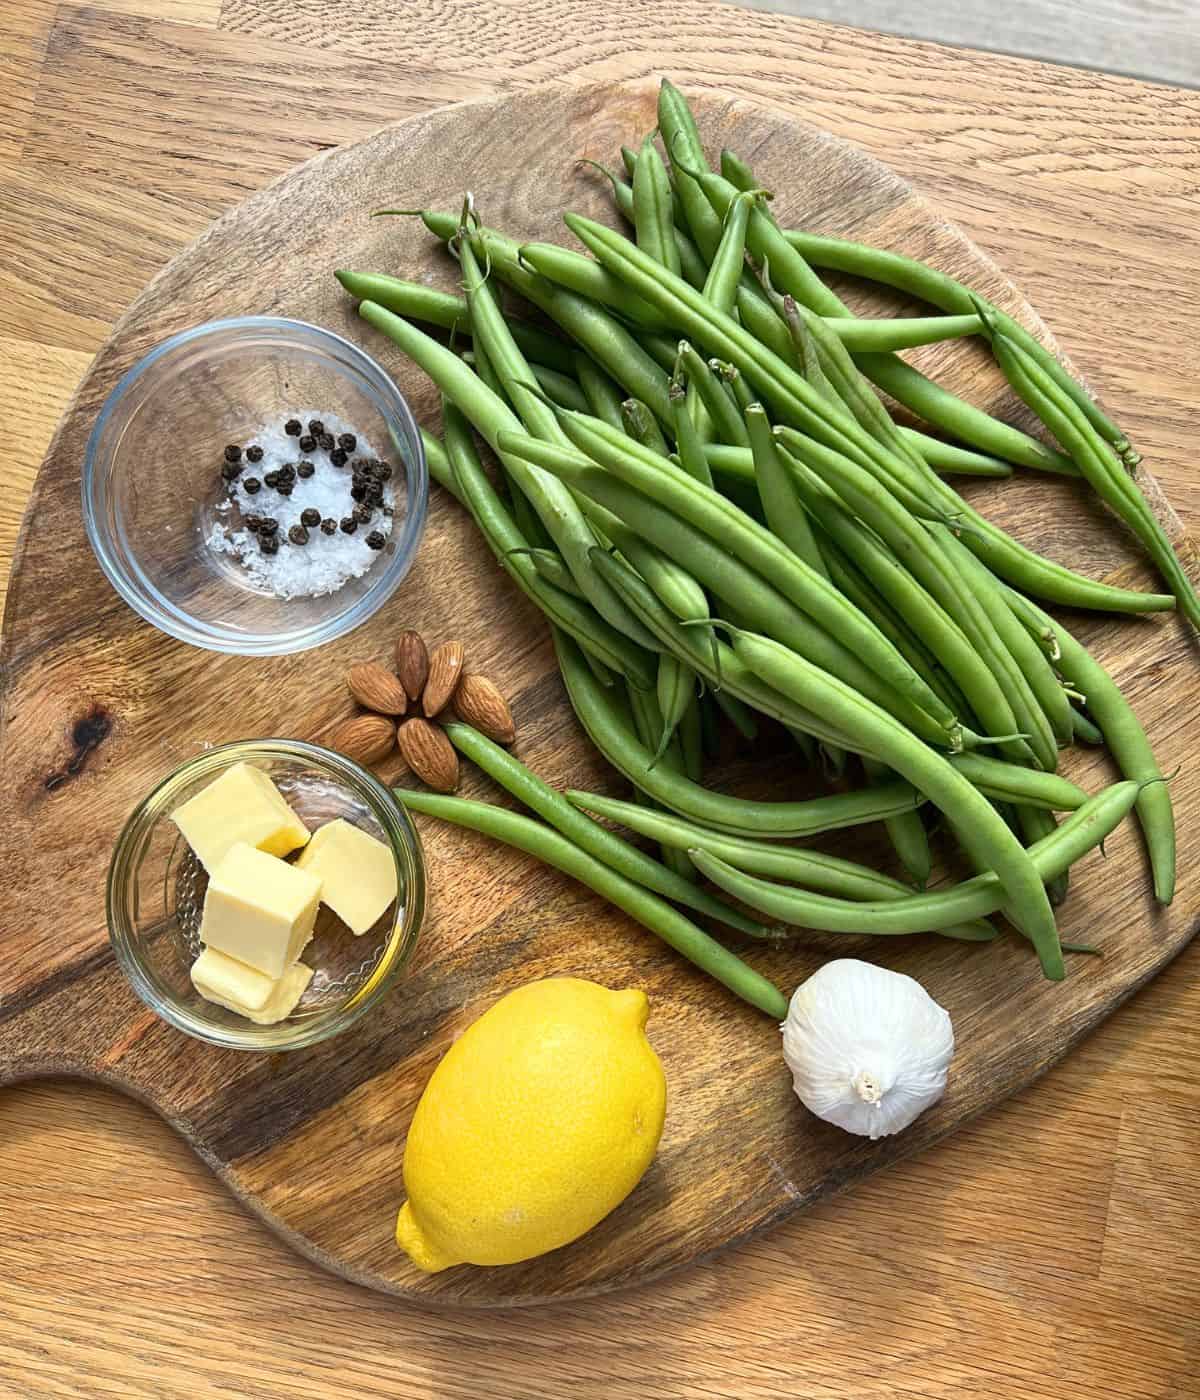 Ingredients for green beans with garlic on a wood board.